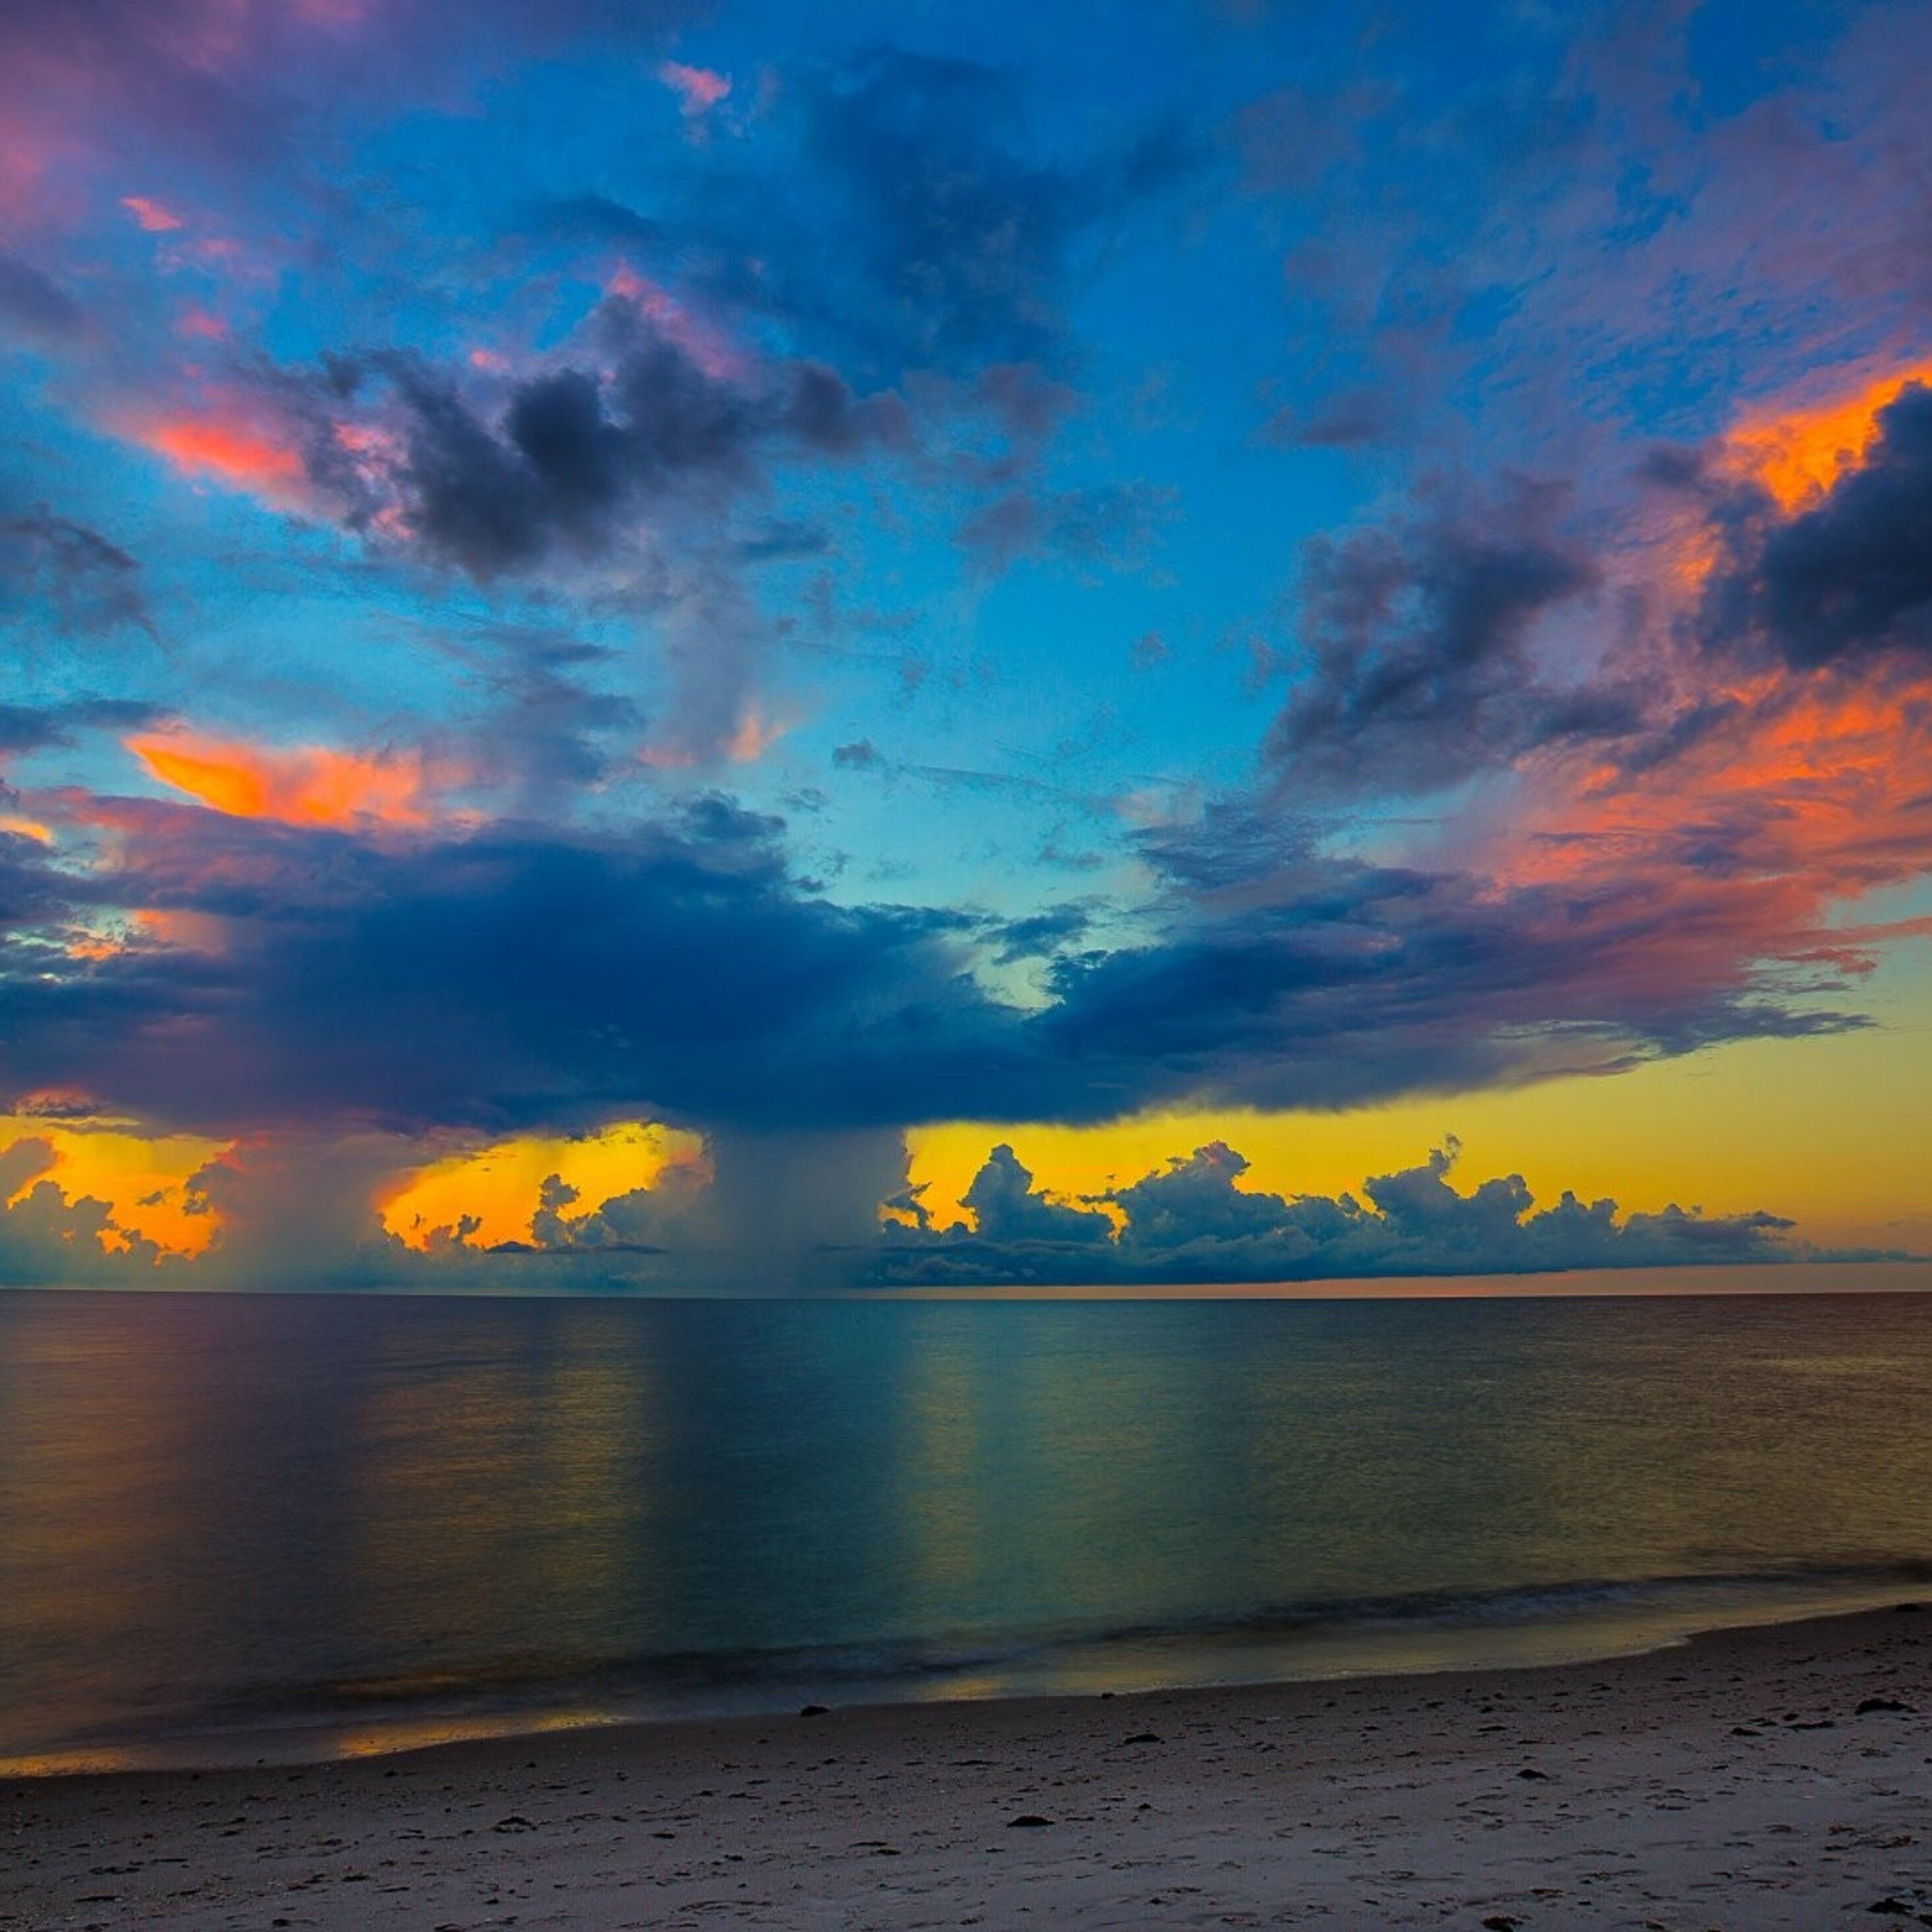 A beautiful sunset with clouds reflecting in the ocean - Florida